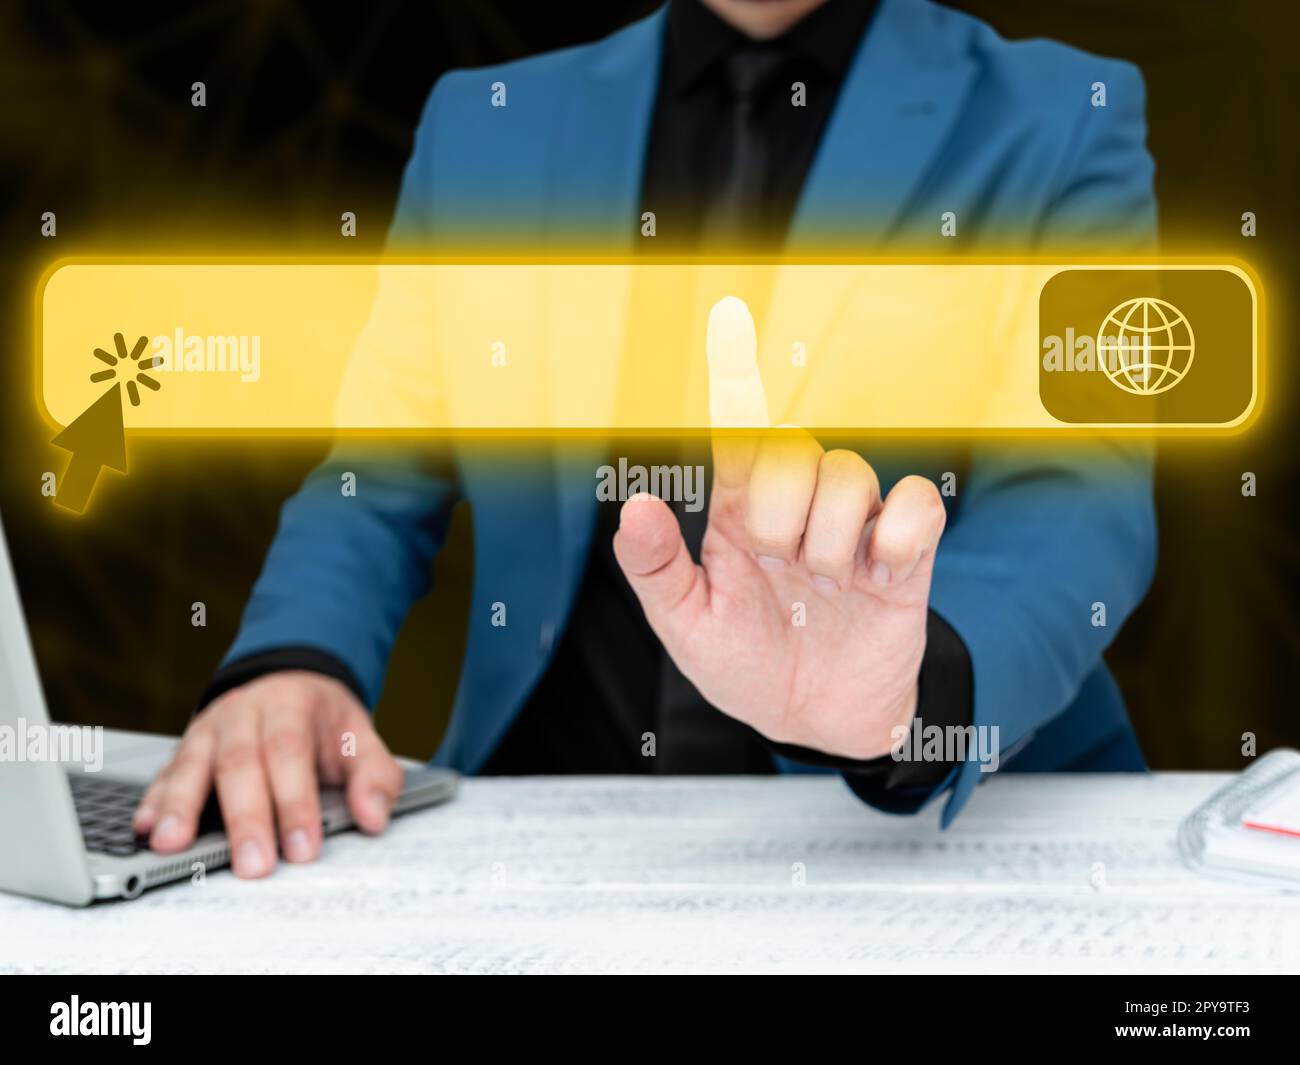 Businessman in blue jacket sitting at the white table and pressing virtual button. Laptop laying on the desk.Futuristic style image with colored glow. Stock Photo